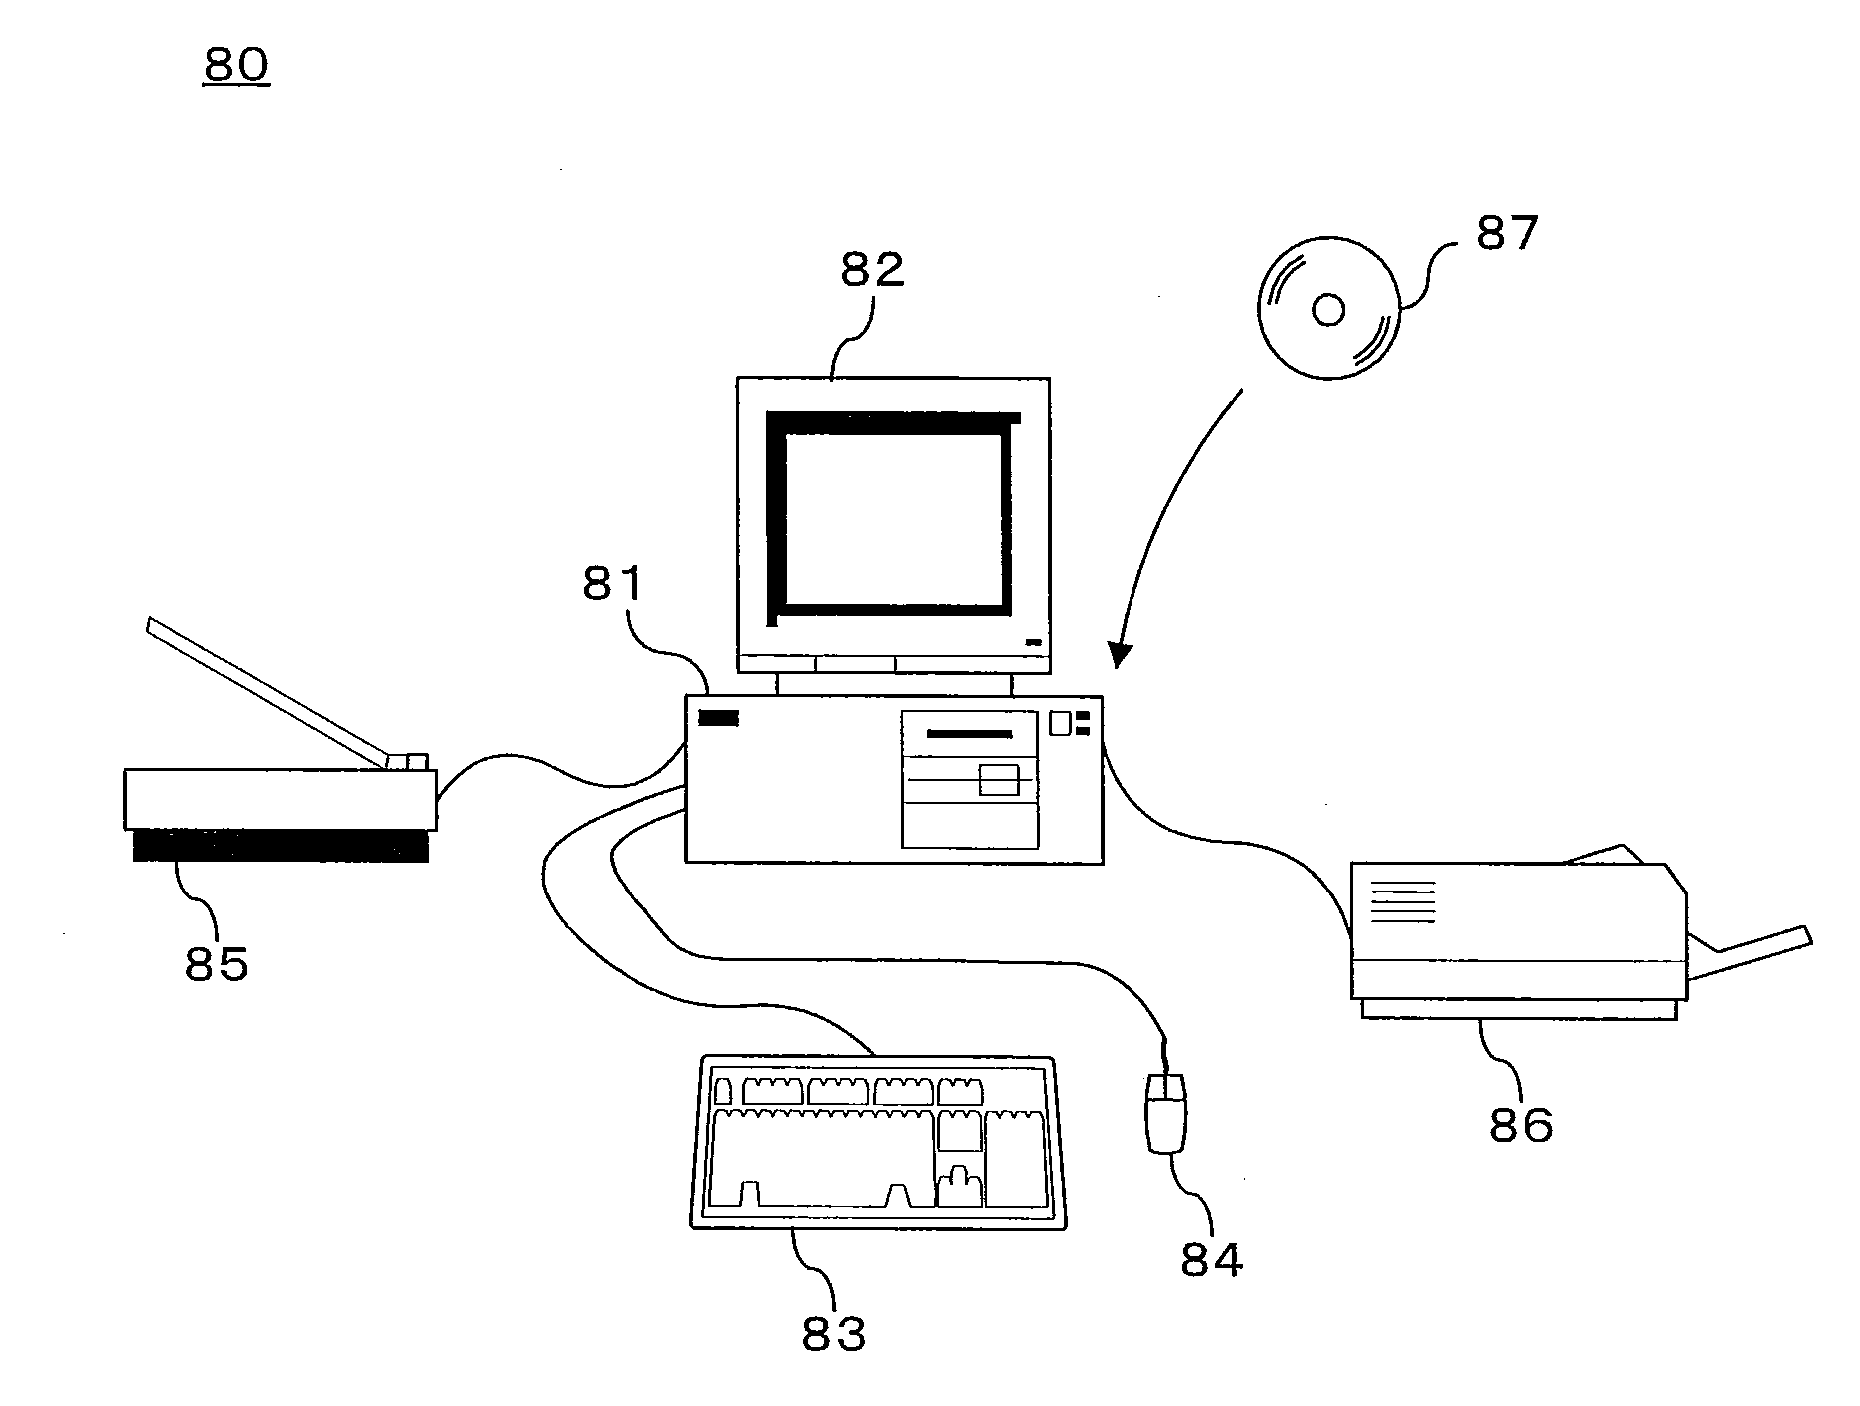 Image processing apparatus, image forming apparatus and memory product